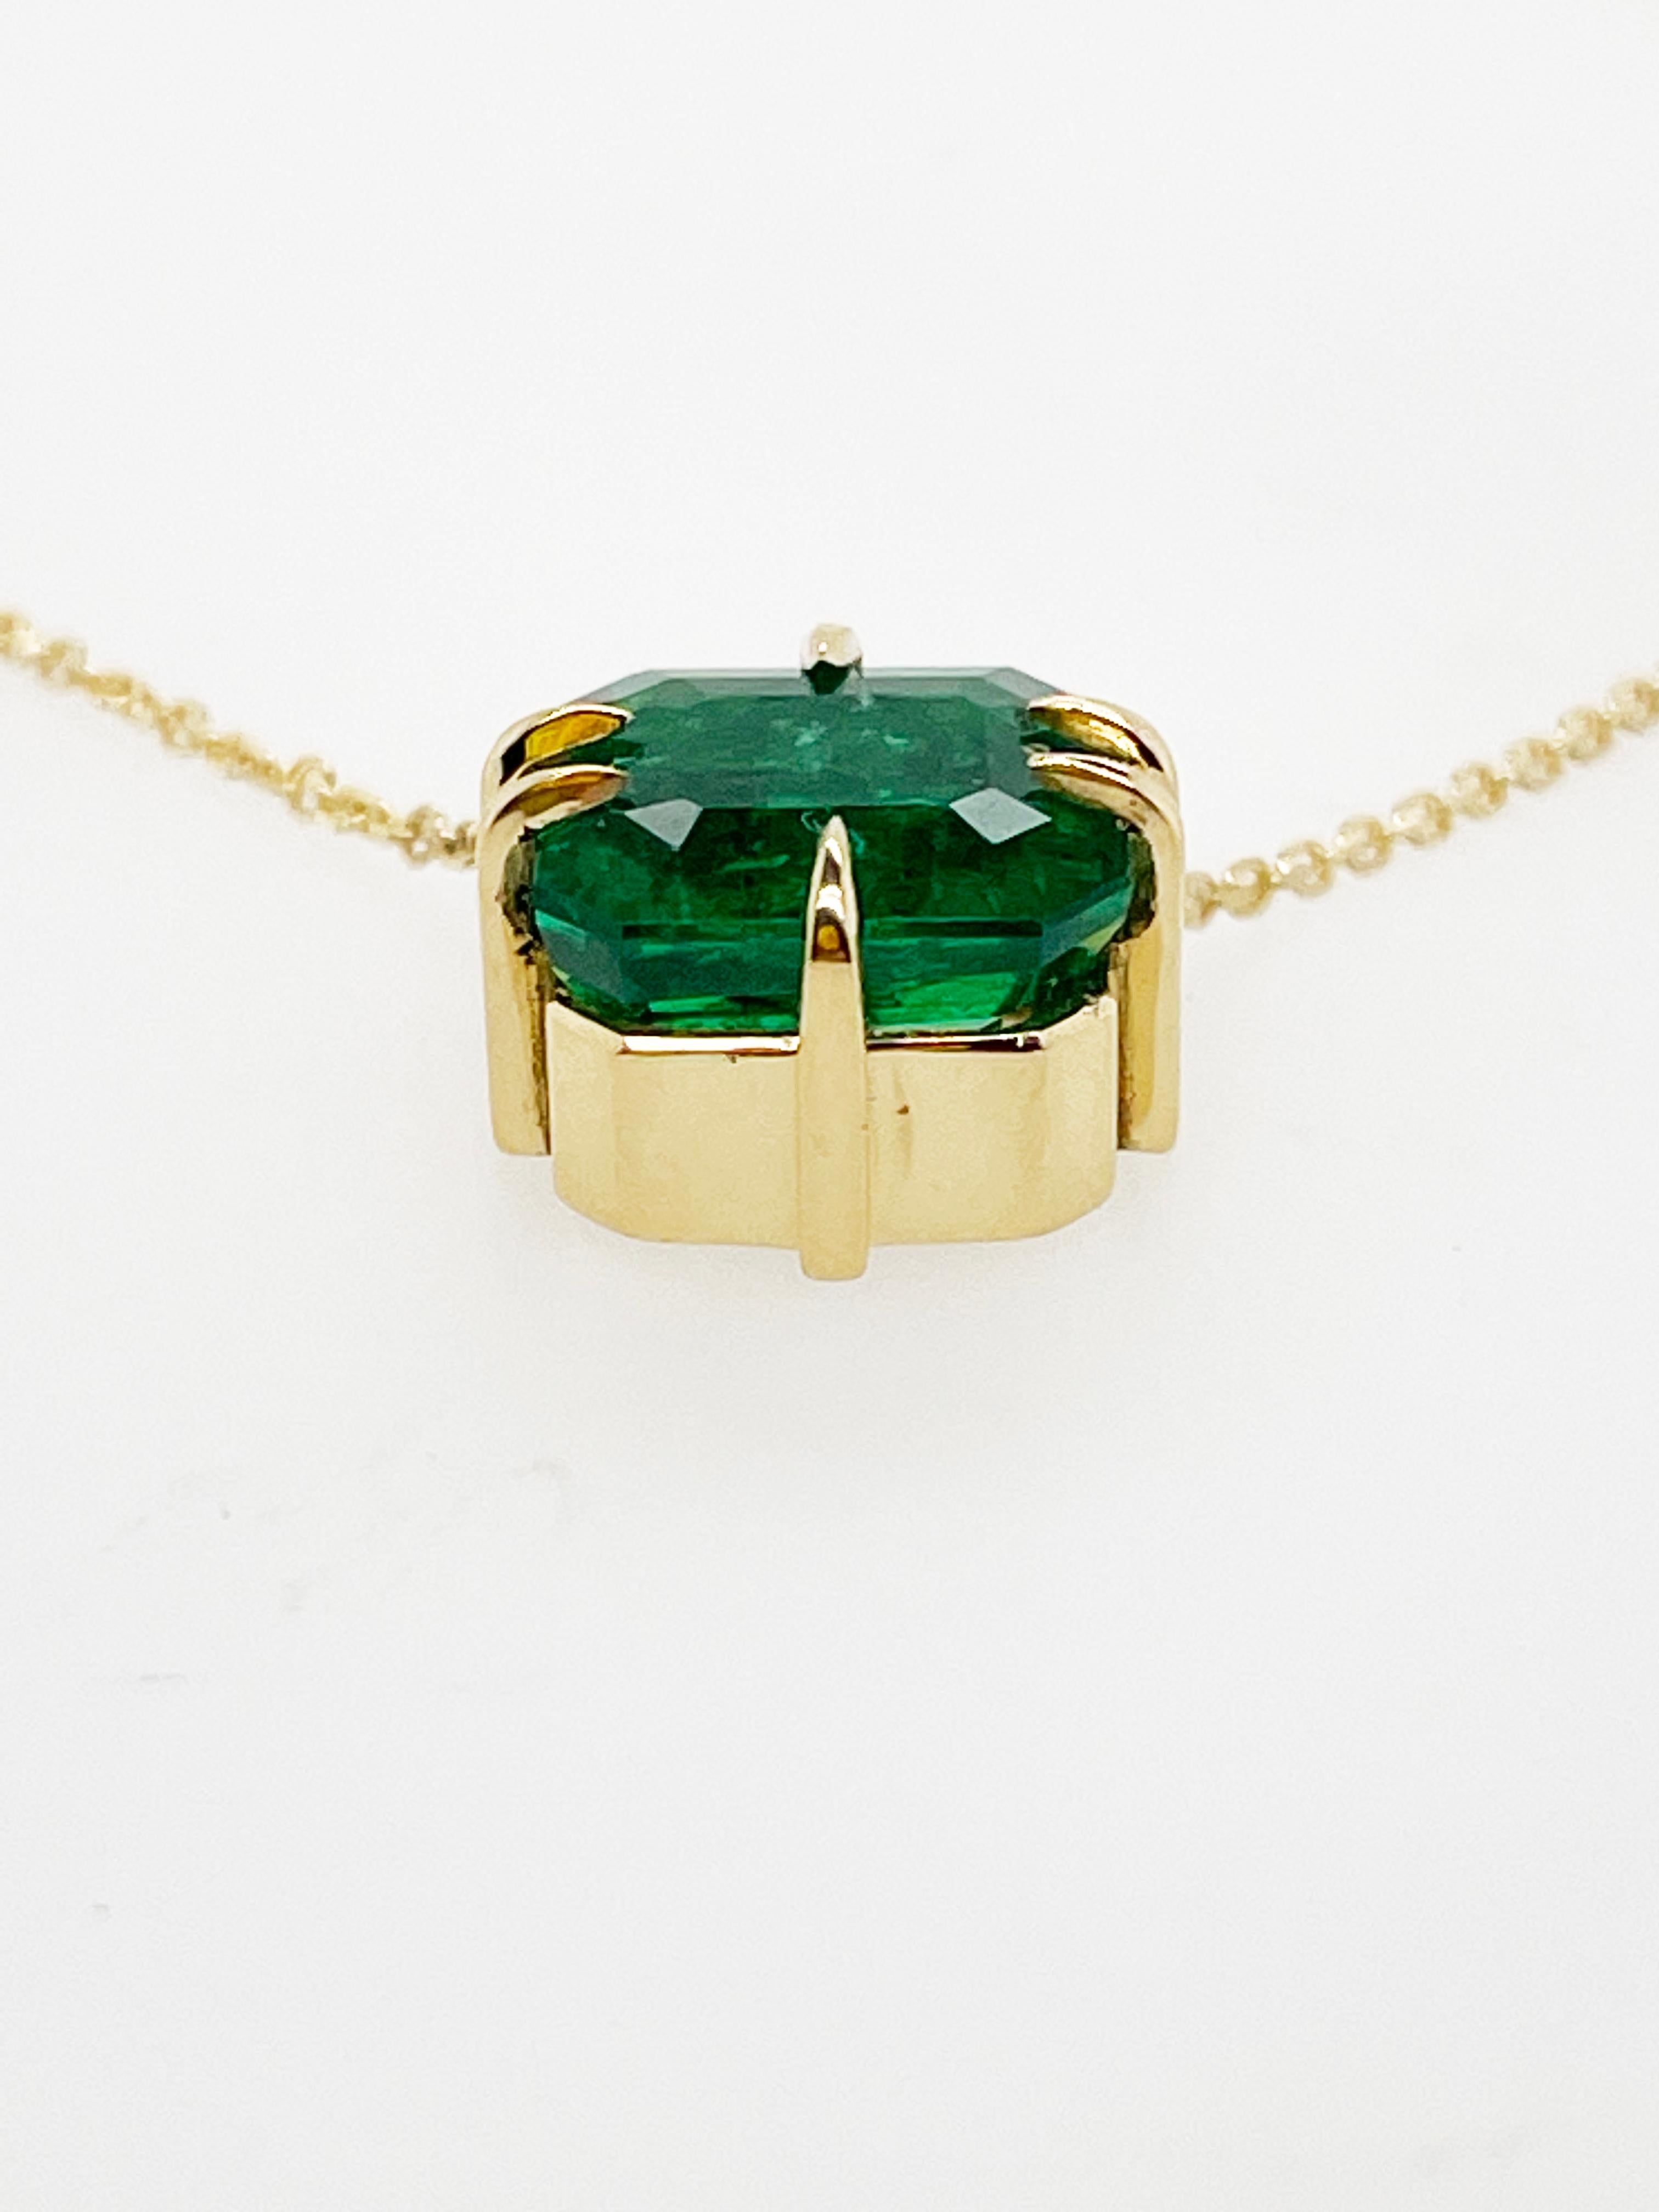 Emerald Cut 2.26ct Emerald necklace made in 18k yellow gold with chain 